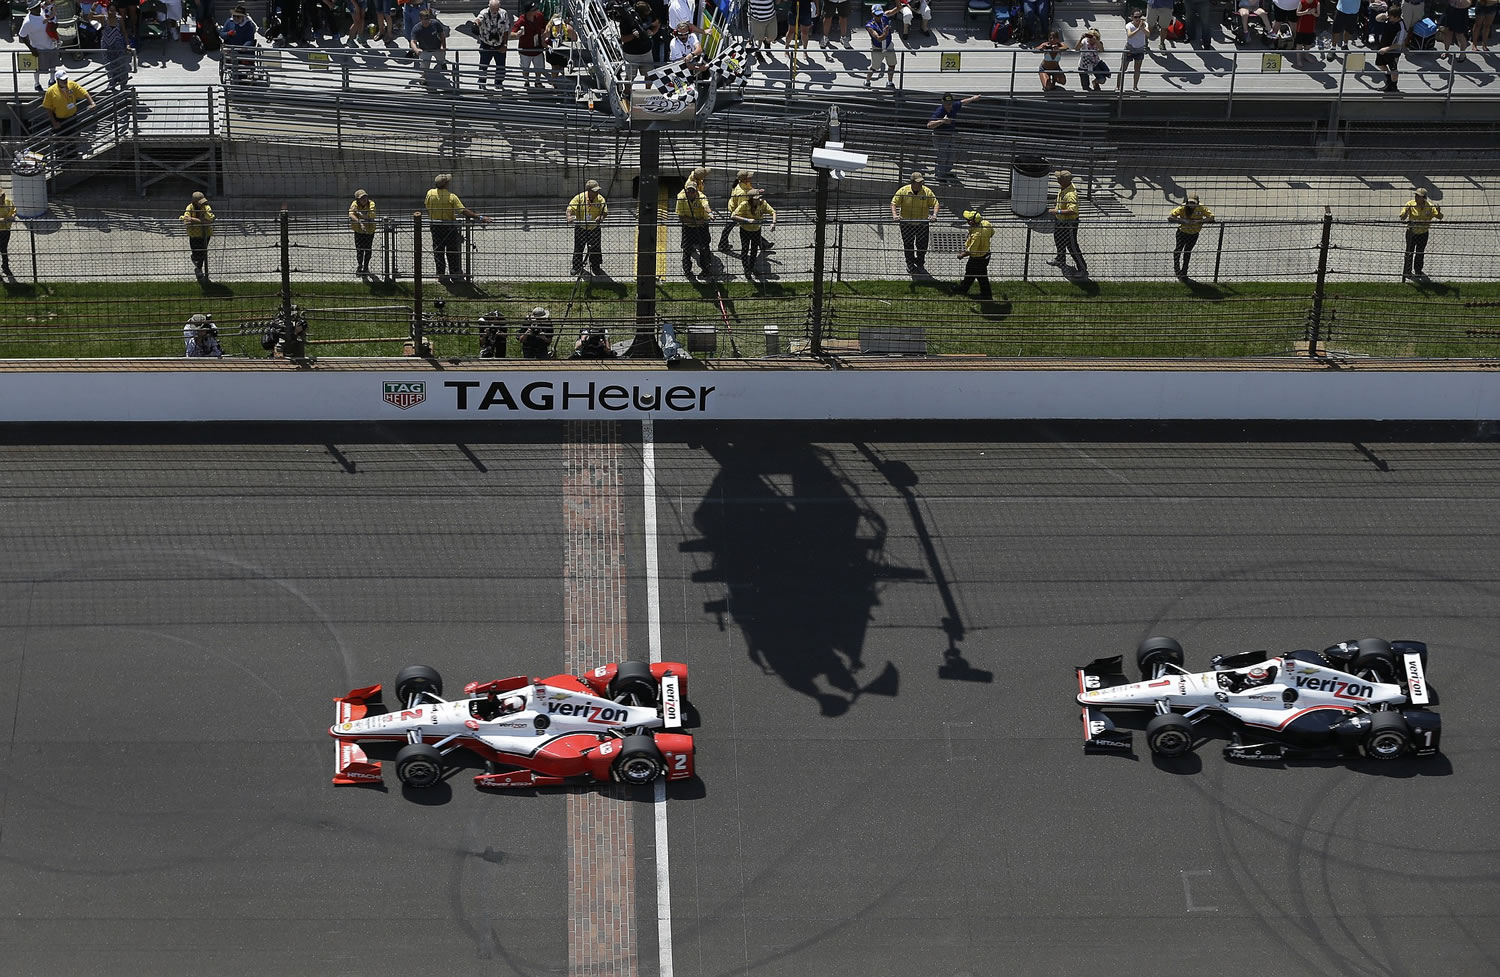 Juan Pablo Montoya takes the checkered flags ahead of Will Power to win the 99th running of the Indianapolis 500 on Sunday, May 24, 2015.